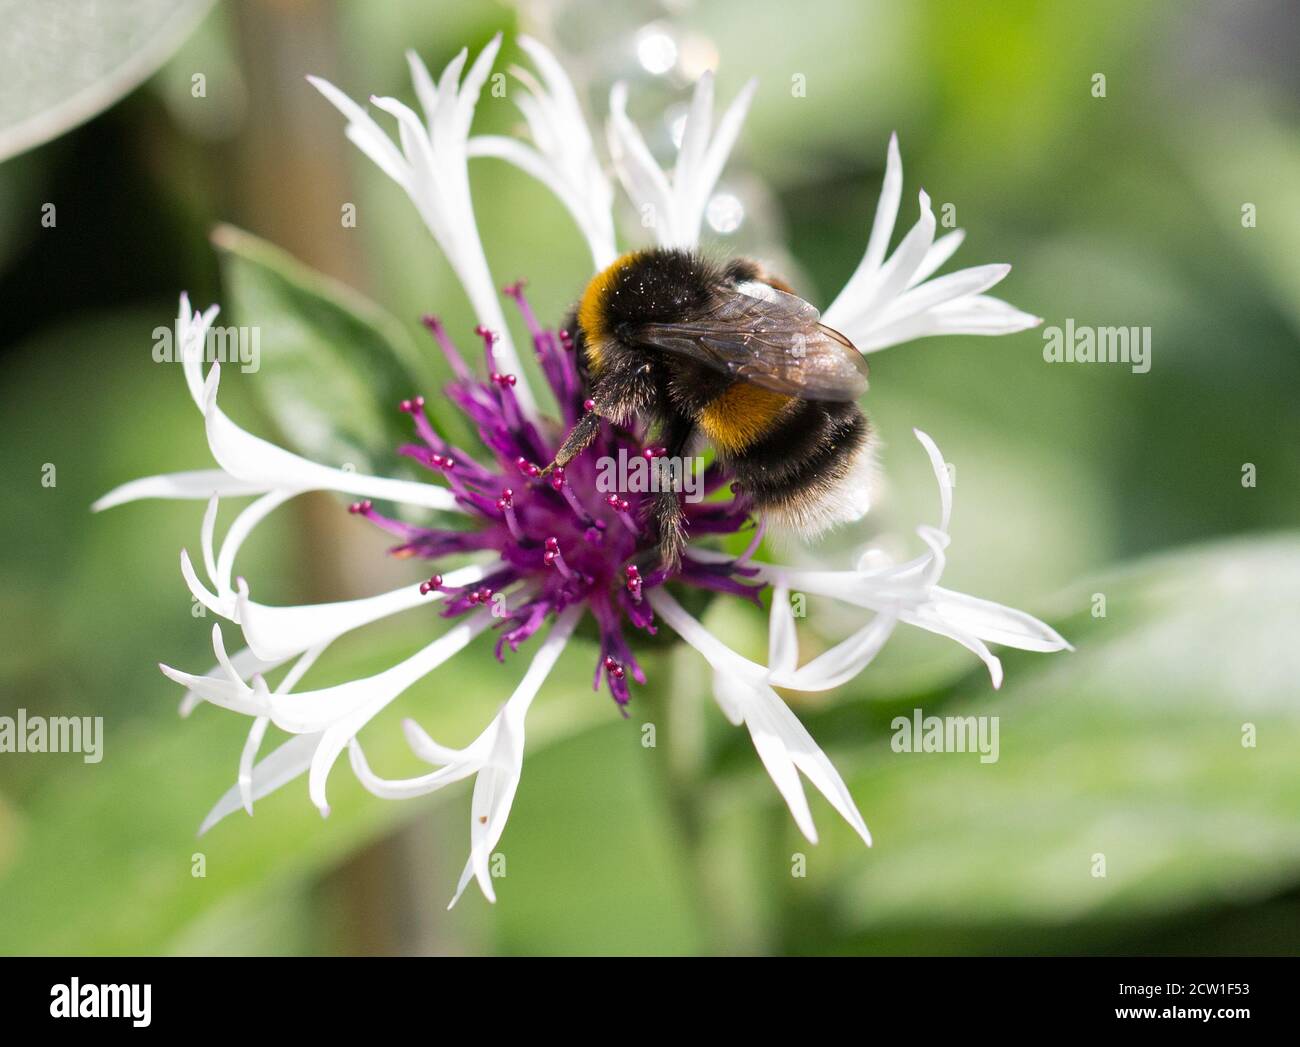 Centaurea montana with a bumble bee feeding from the stamen with a natural green background Stock Photo